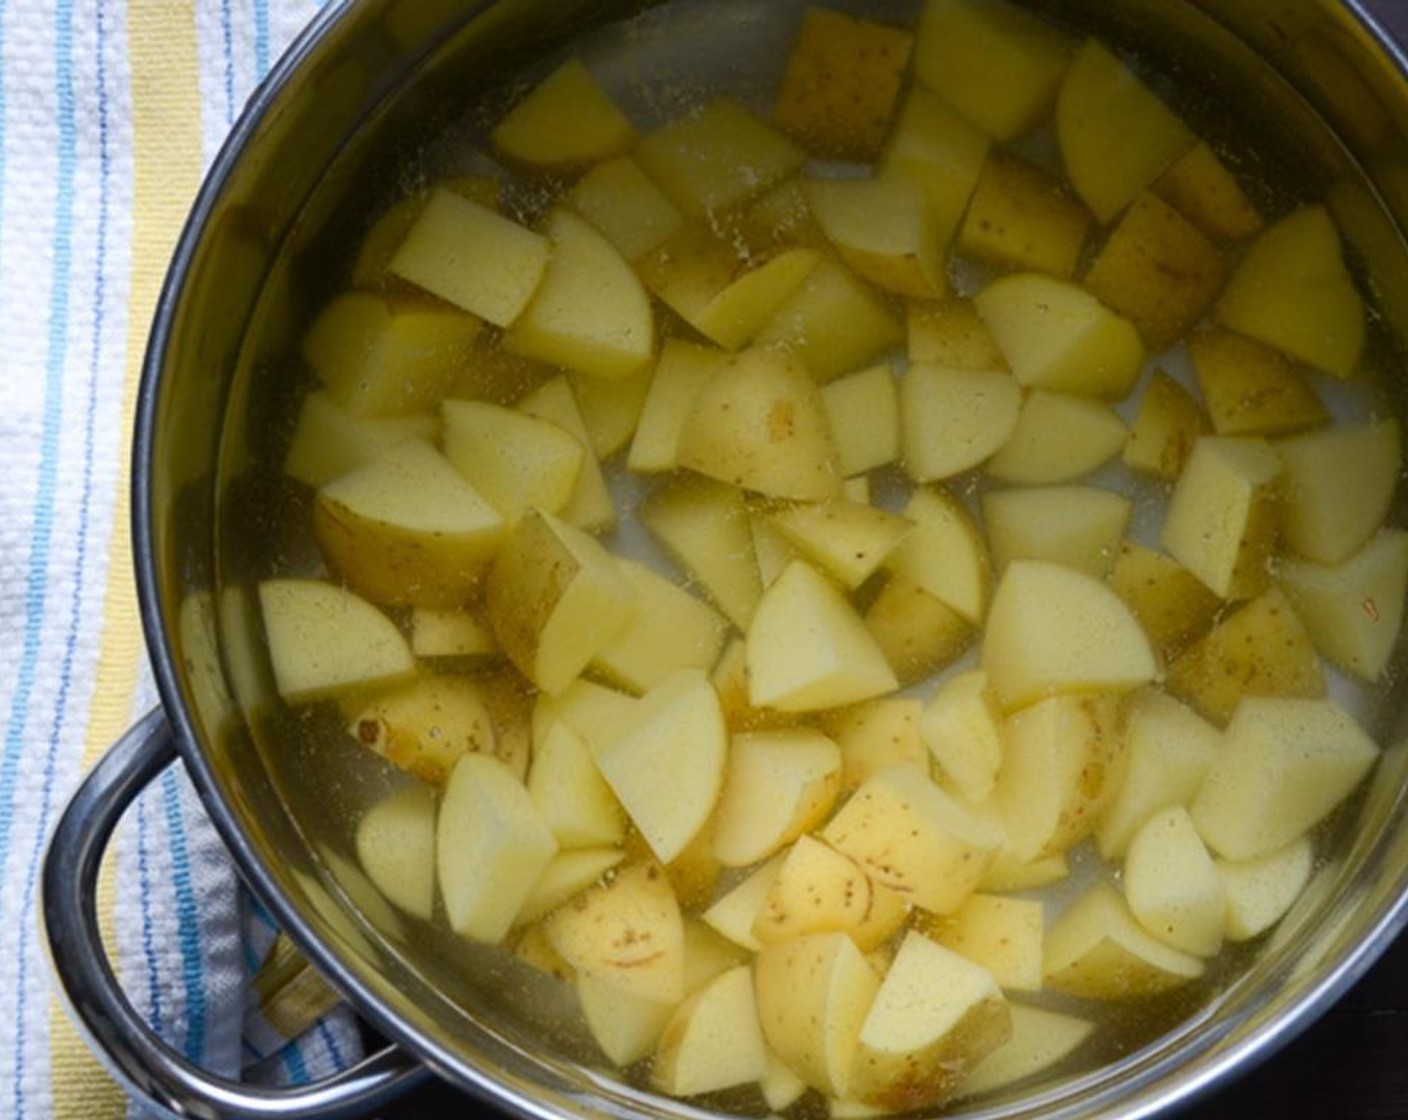 step 3 Cut the Yukon Gold Potatoes (4 1/2 cups) into one-inch pieces. No need to peel them. Fill a large pot halfway with water. Add the Kosher Salt (1/2 tsp) and bring to a boil. When the water boils, add the potatoes and cook for 15 minutes.